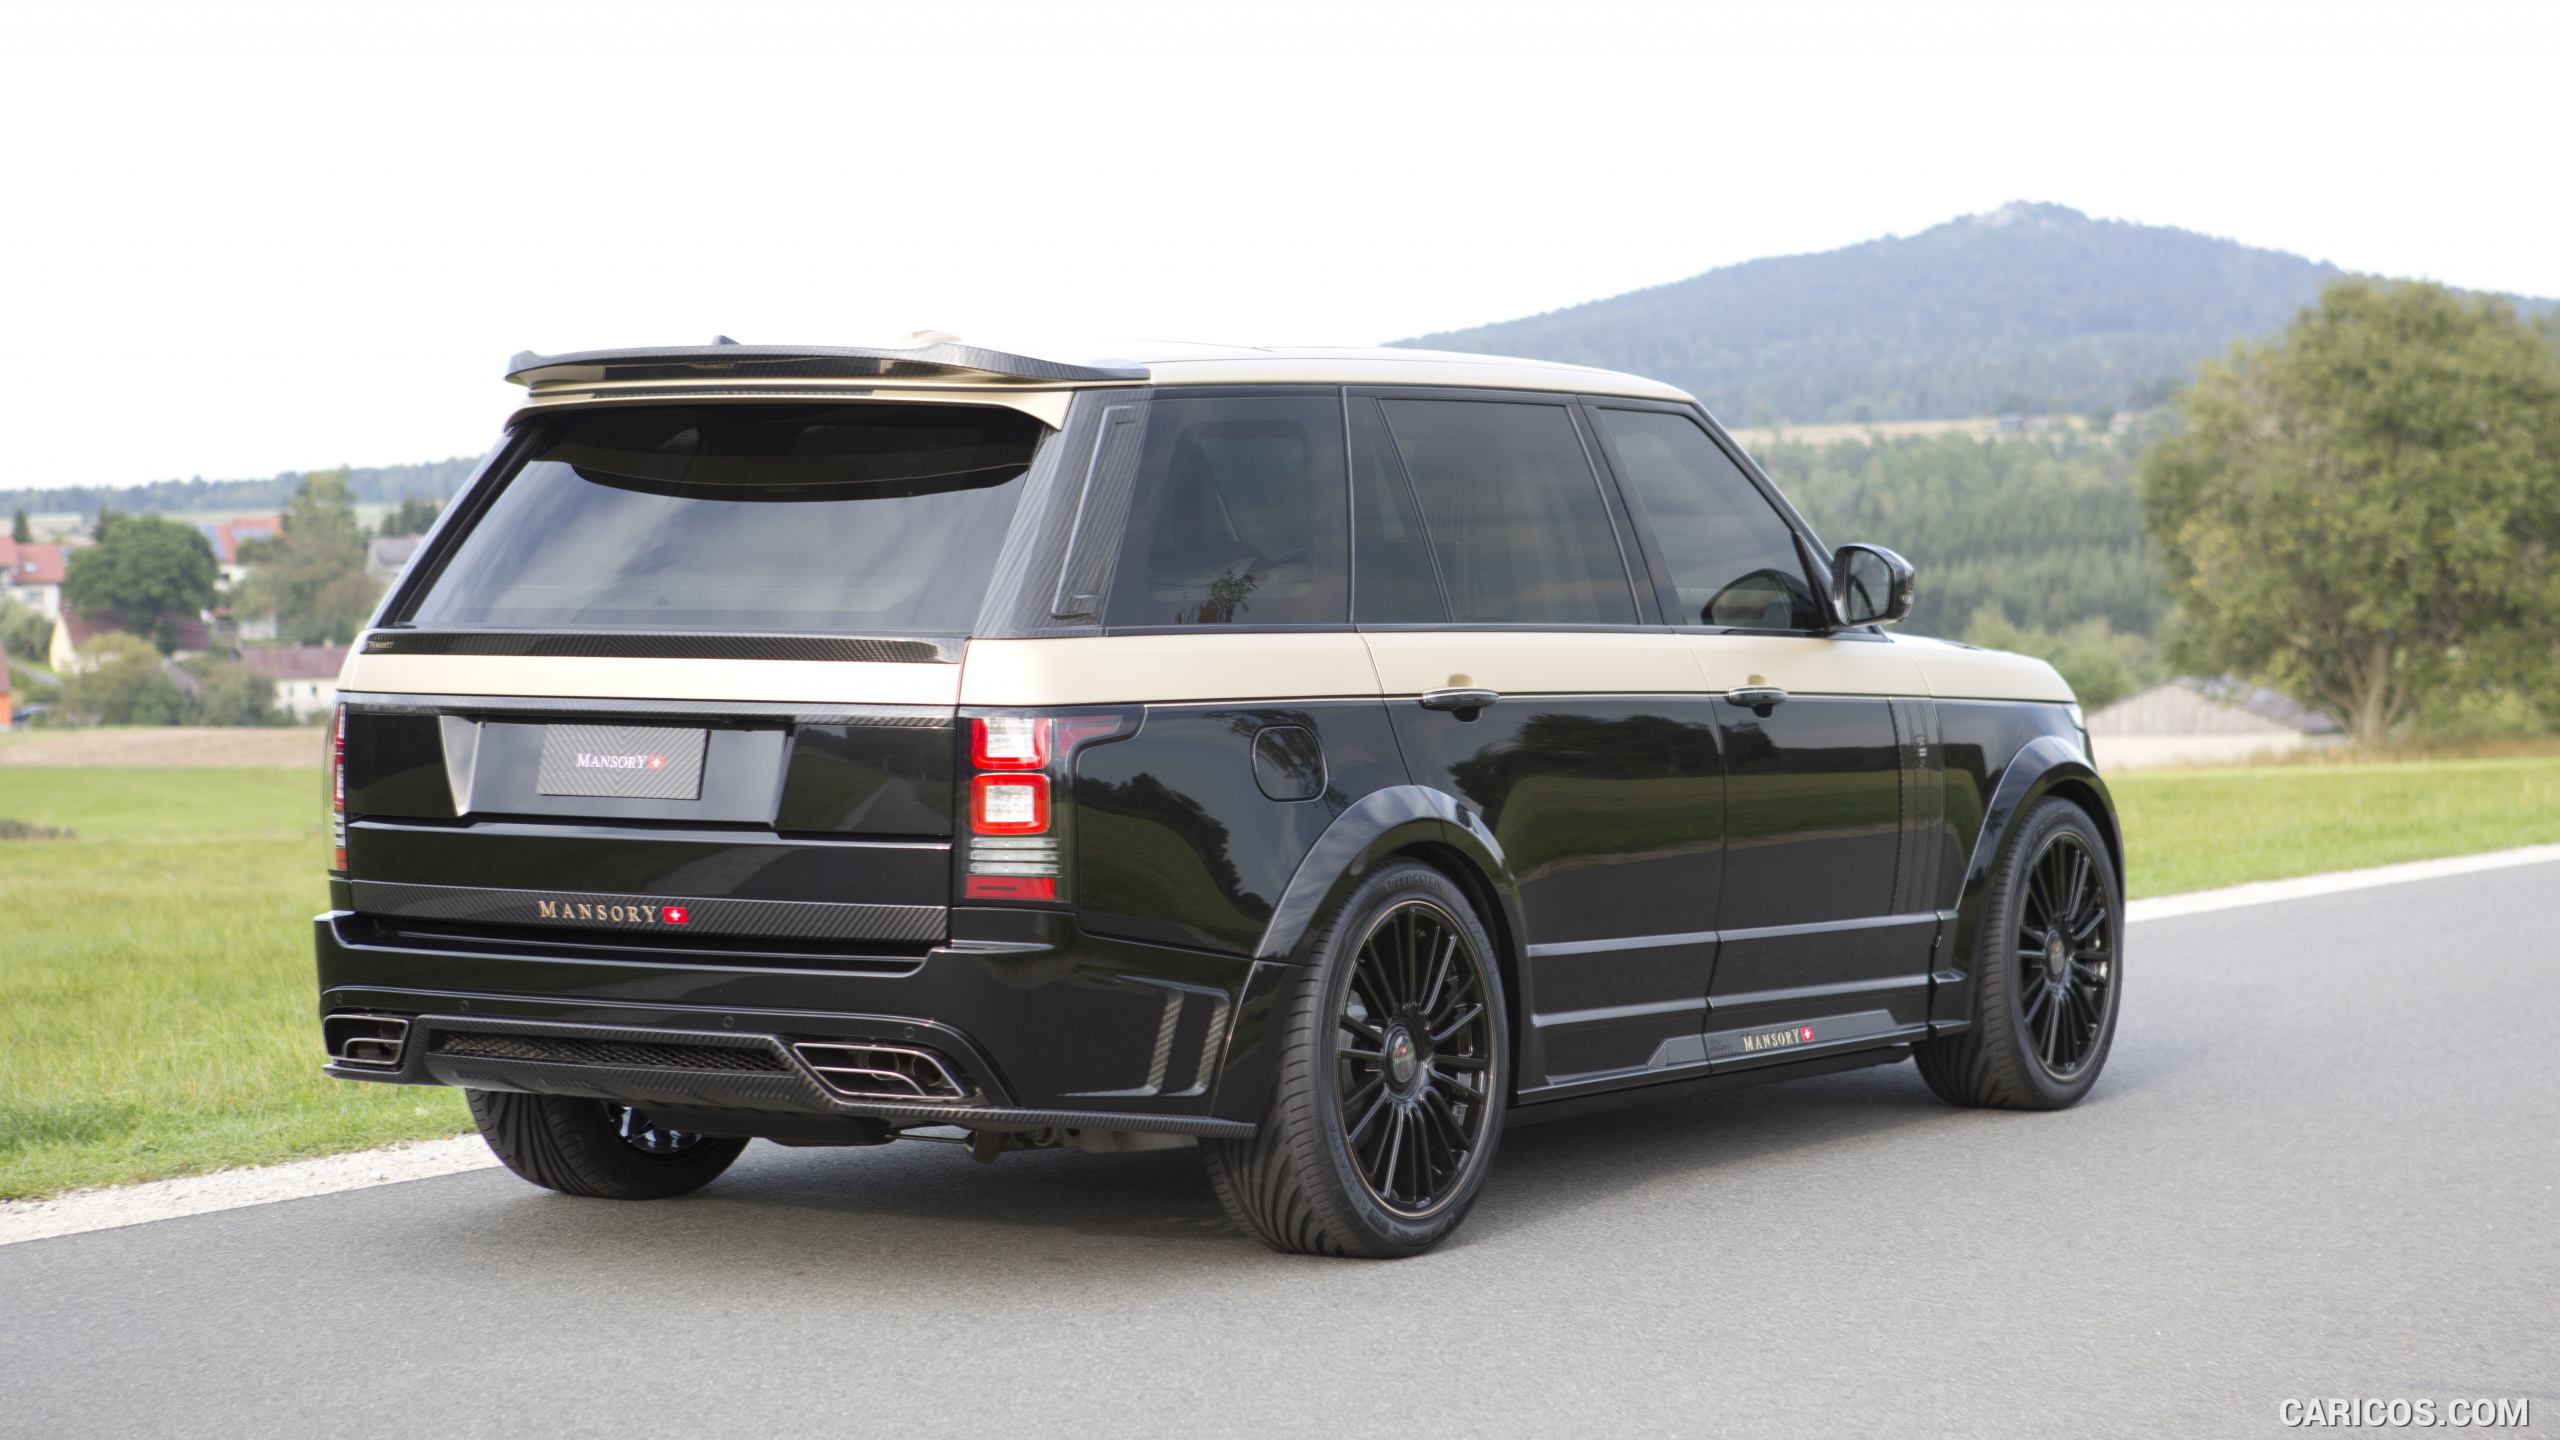 2016 MANSORY Range Rover Autobiography Extended - Rear, #2 of 12